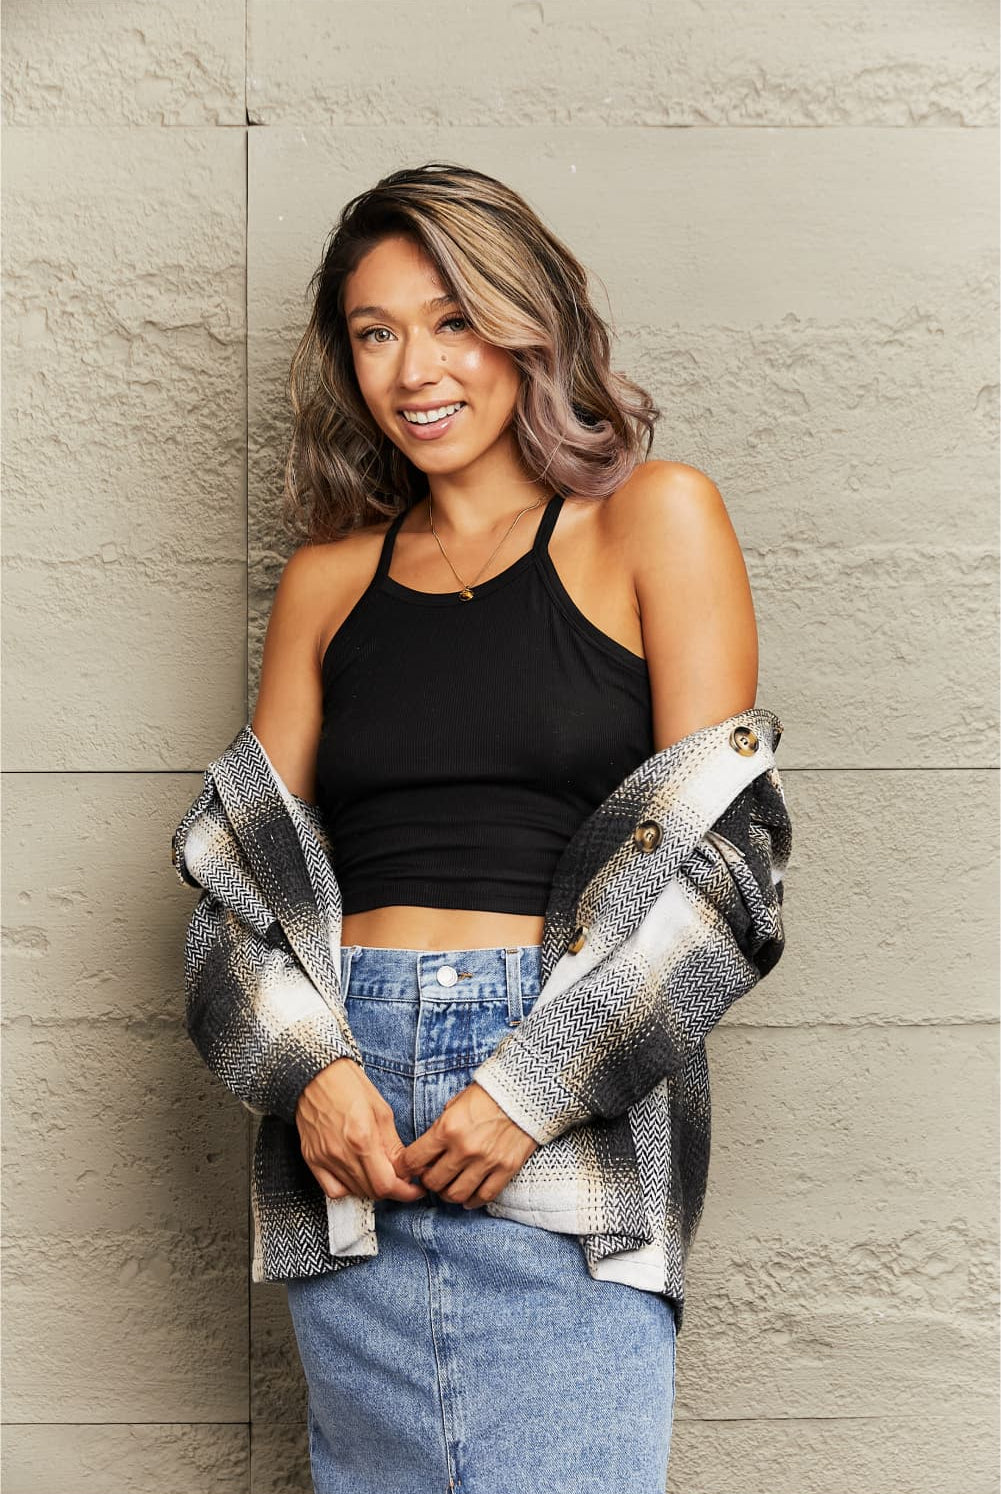 Plaid Dropped Shoulder Collared Jacket - GemThreads Boutique